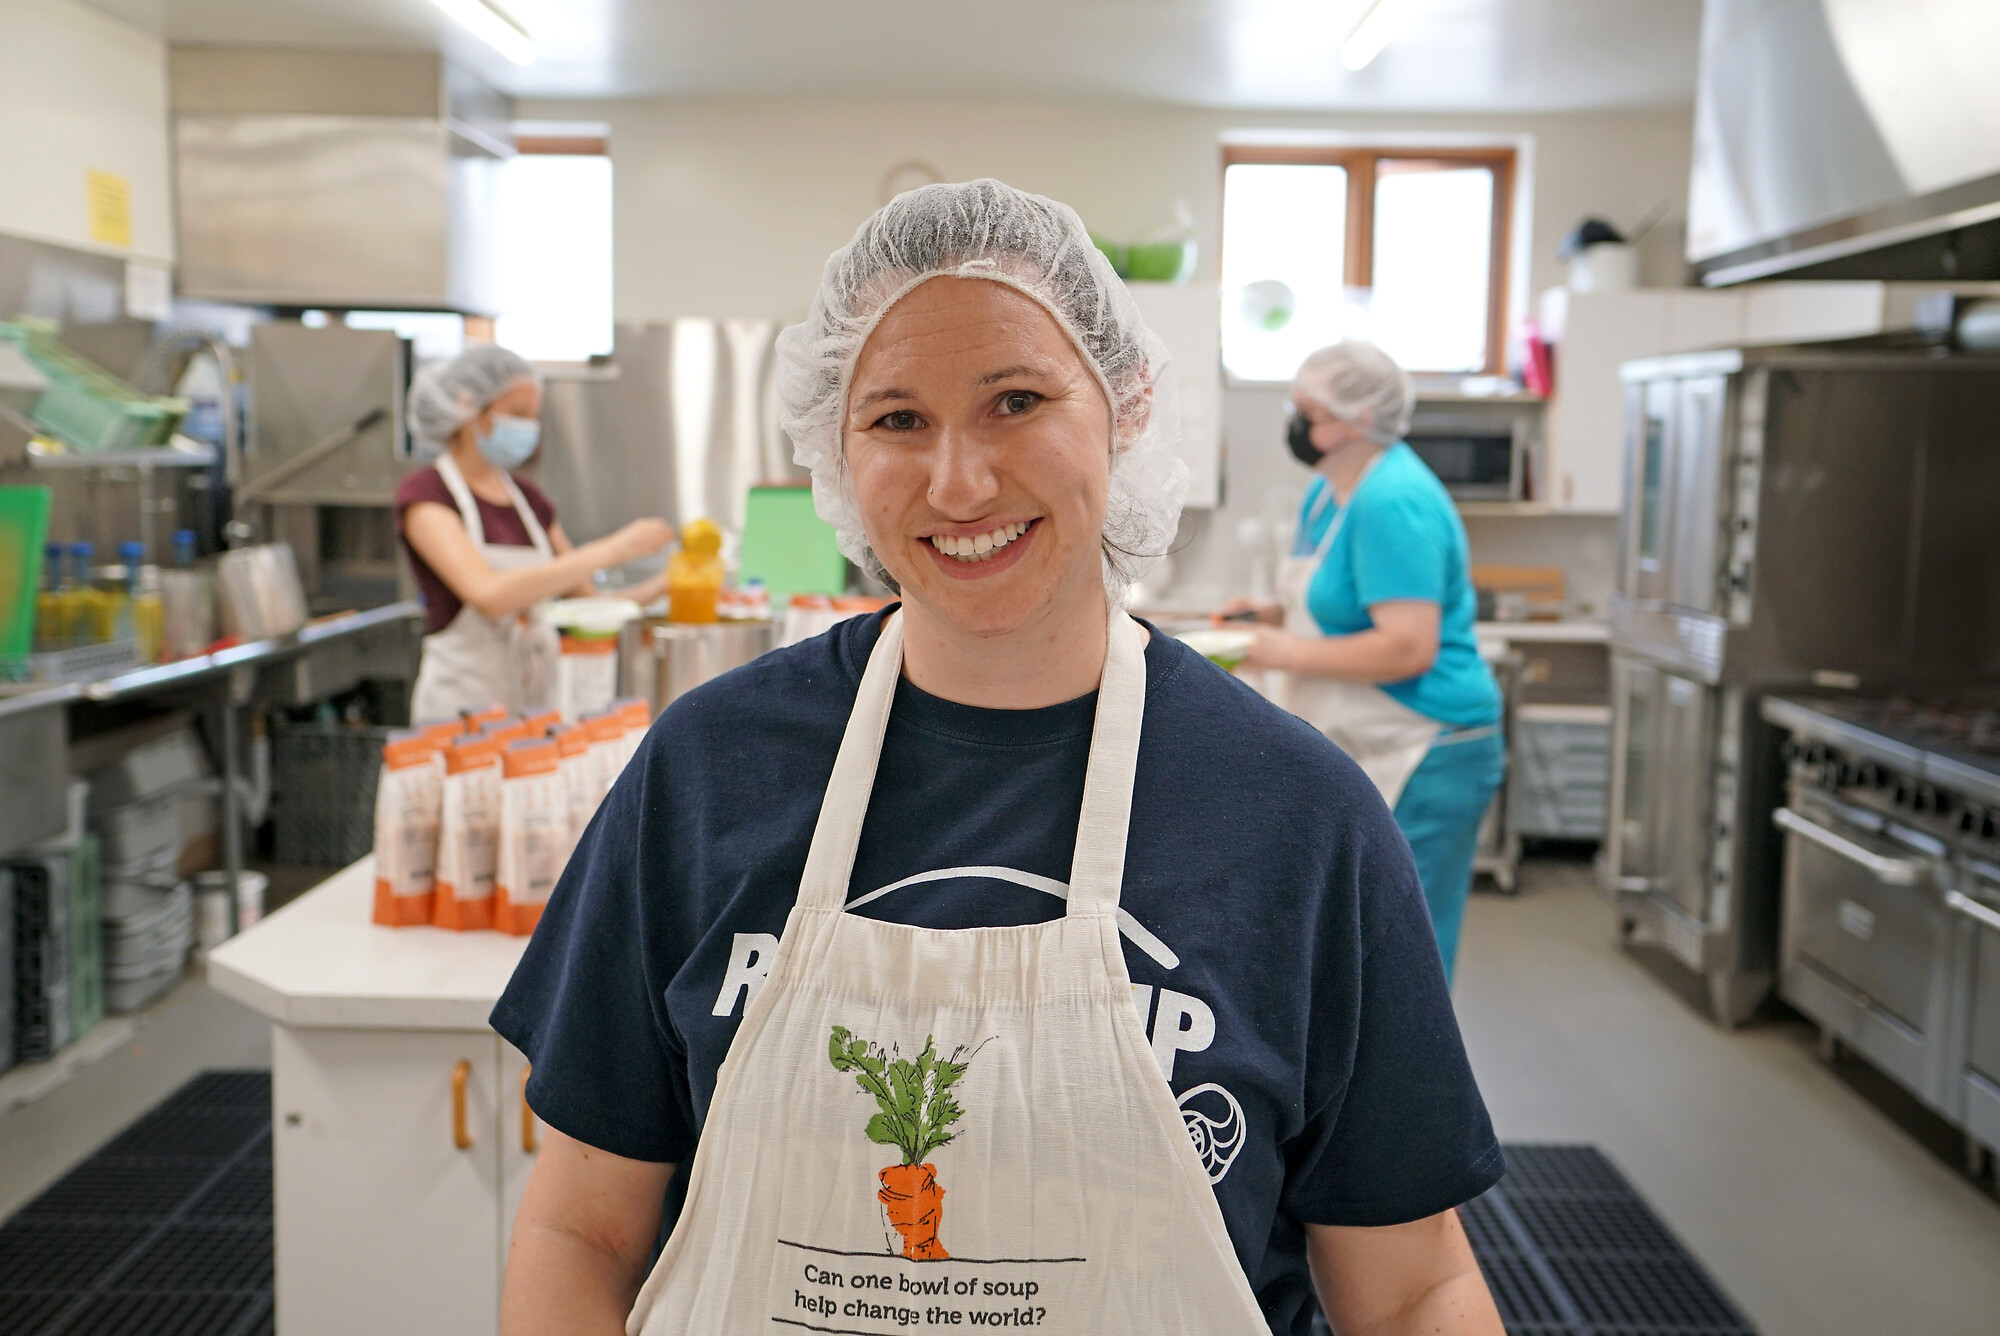 Smiling woman wearing an apron in a commercial kitchen.